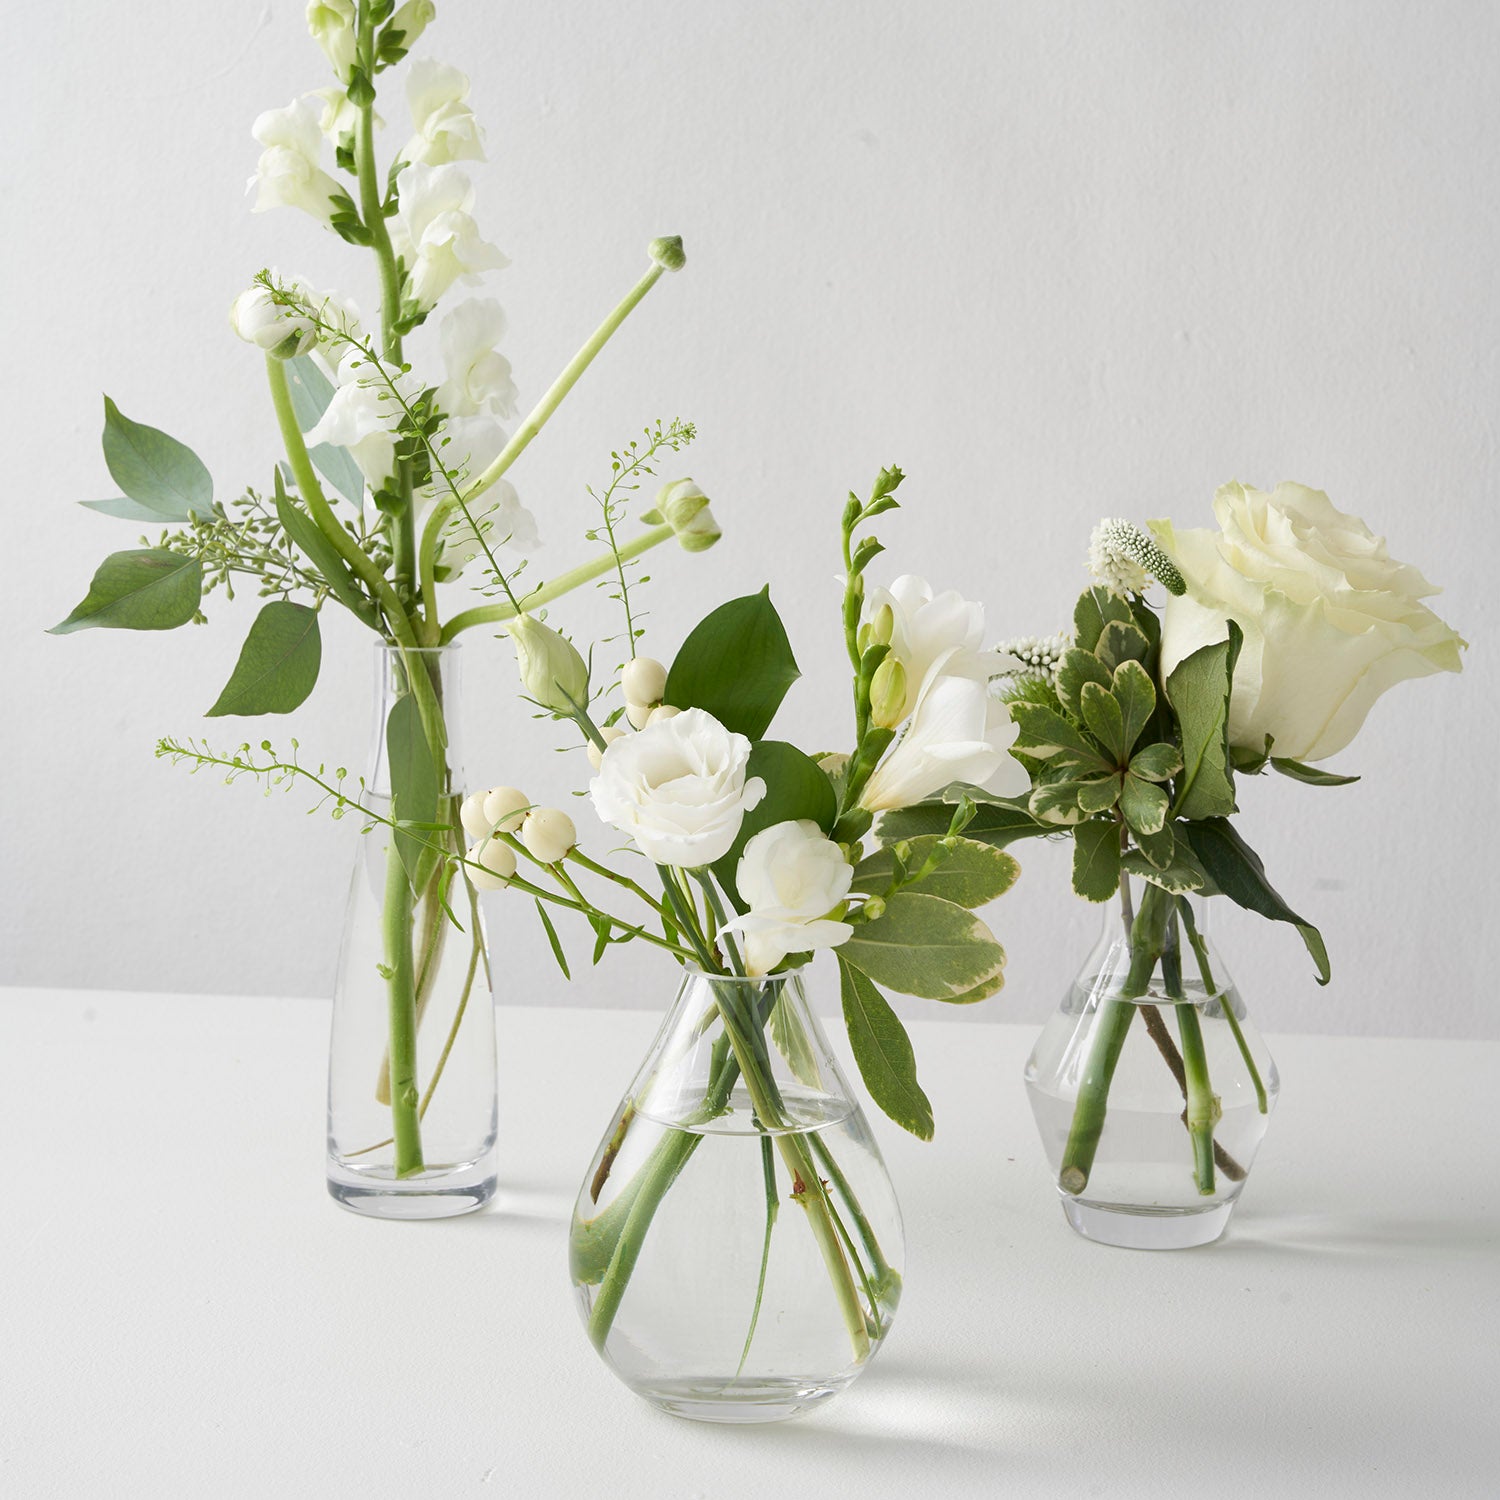 Three small bud vases filled with small white flowers on white background.